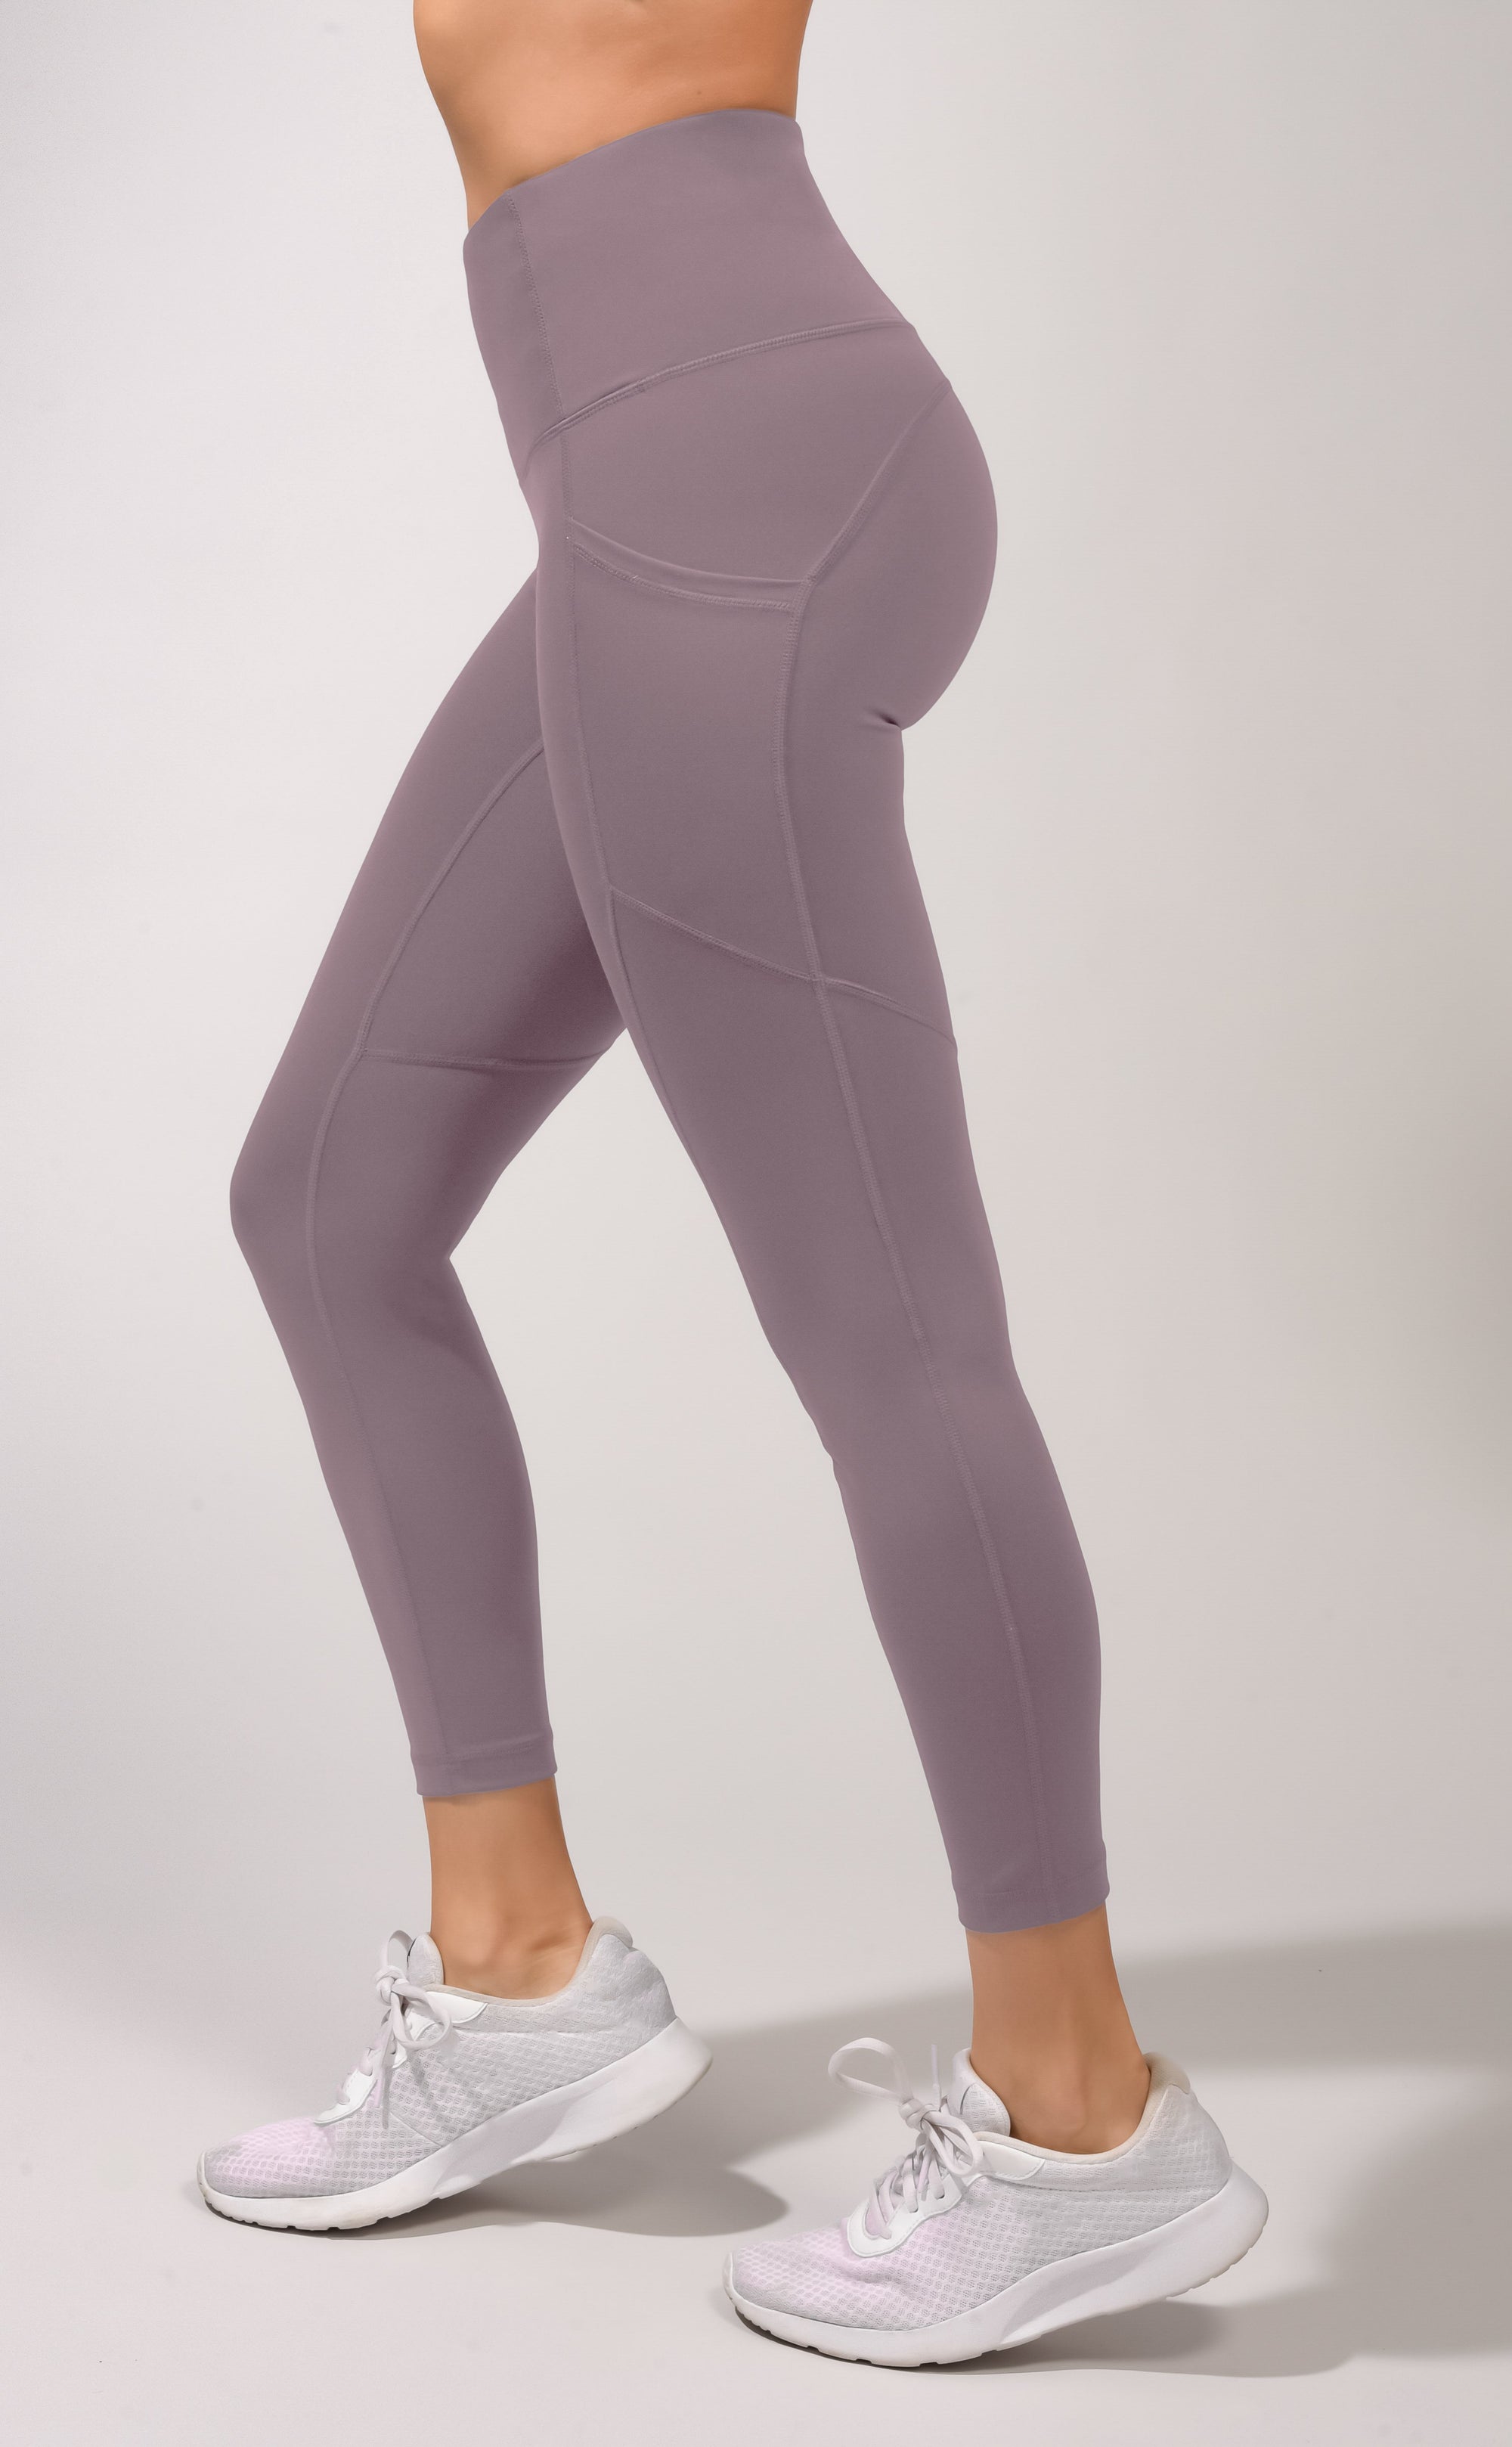 Yogalicious High Waist Ultra Soft 7/8 Ankle Leggings with Pockets